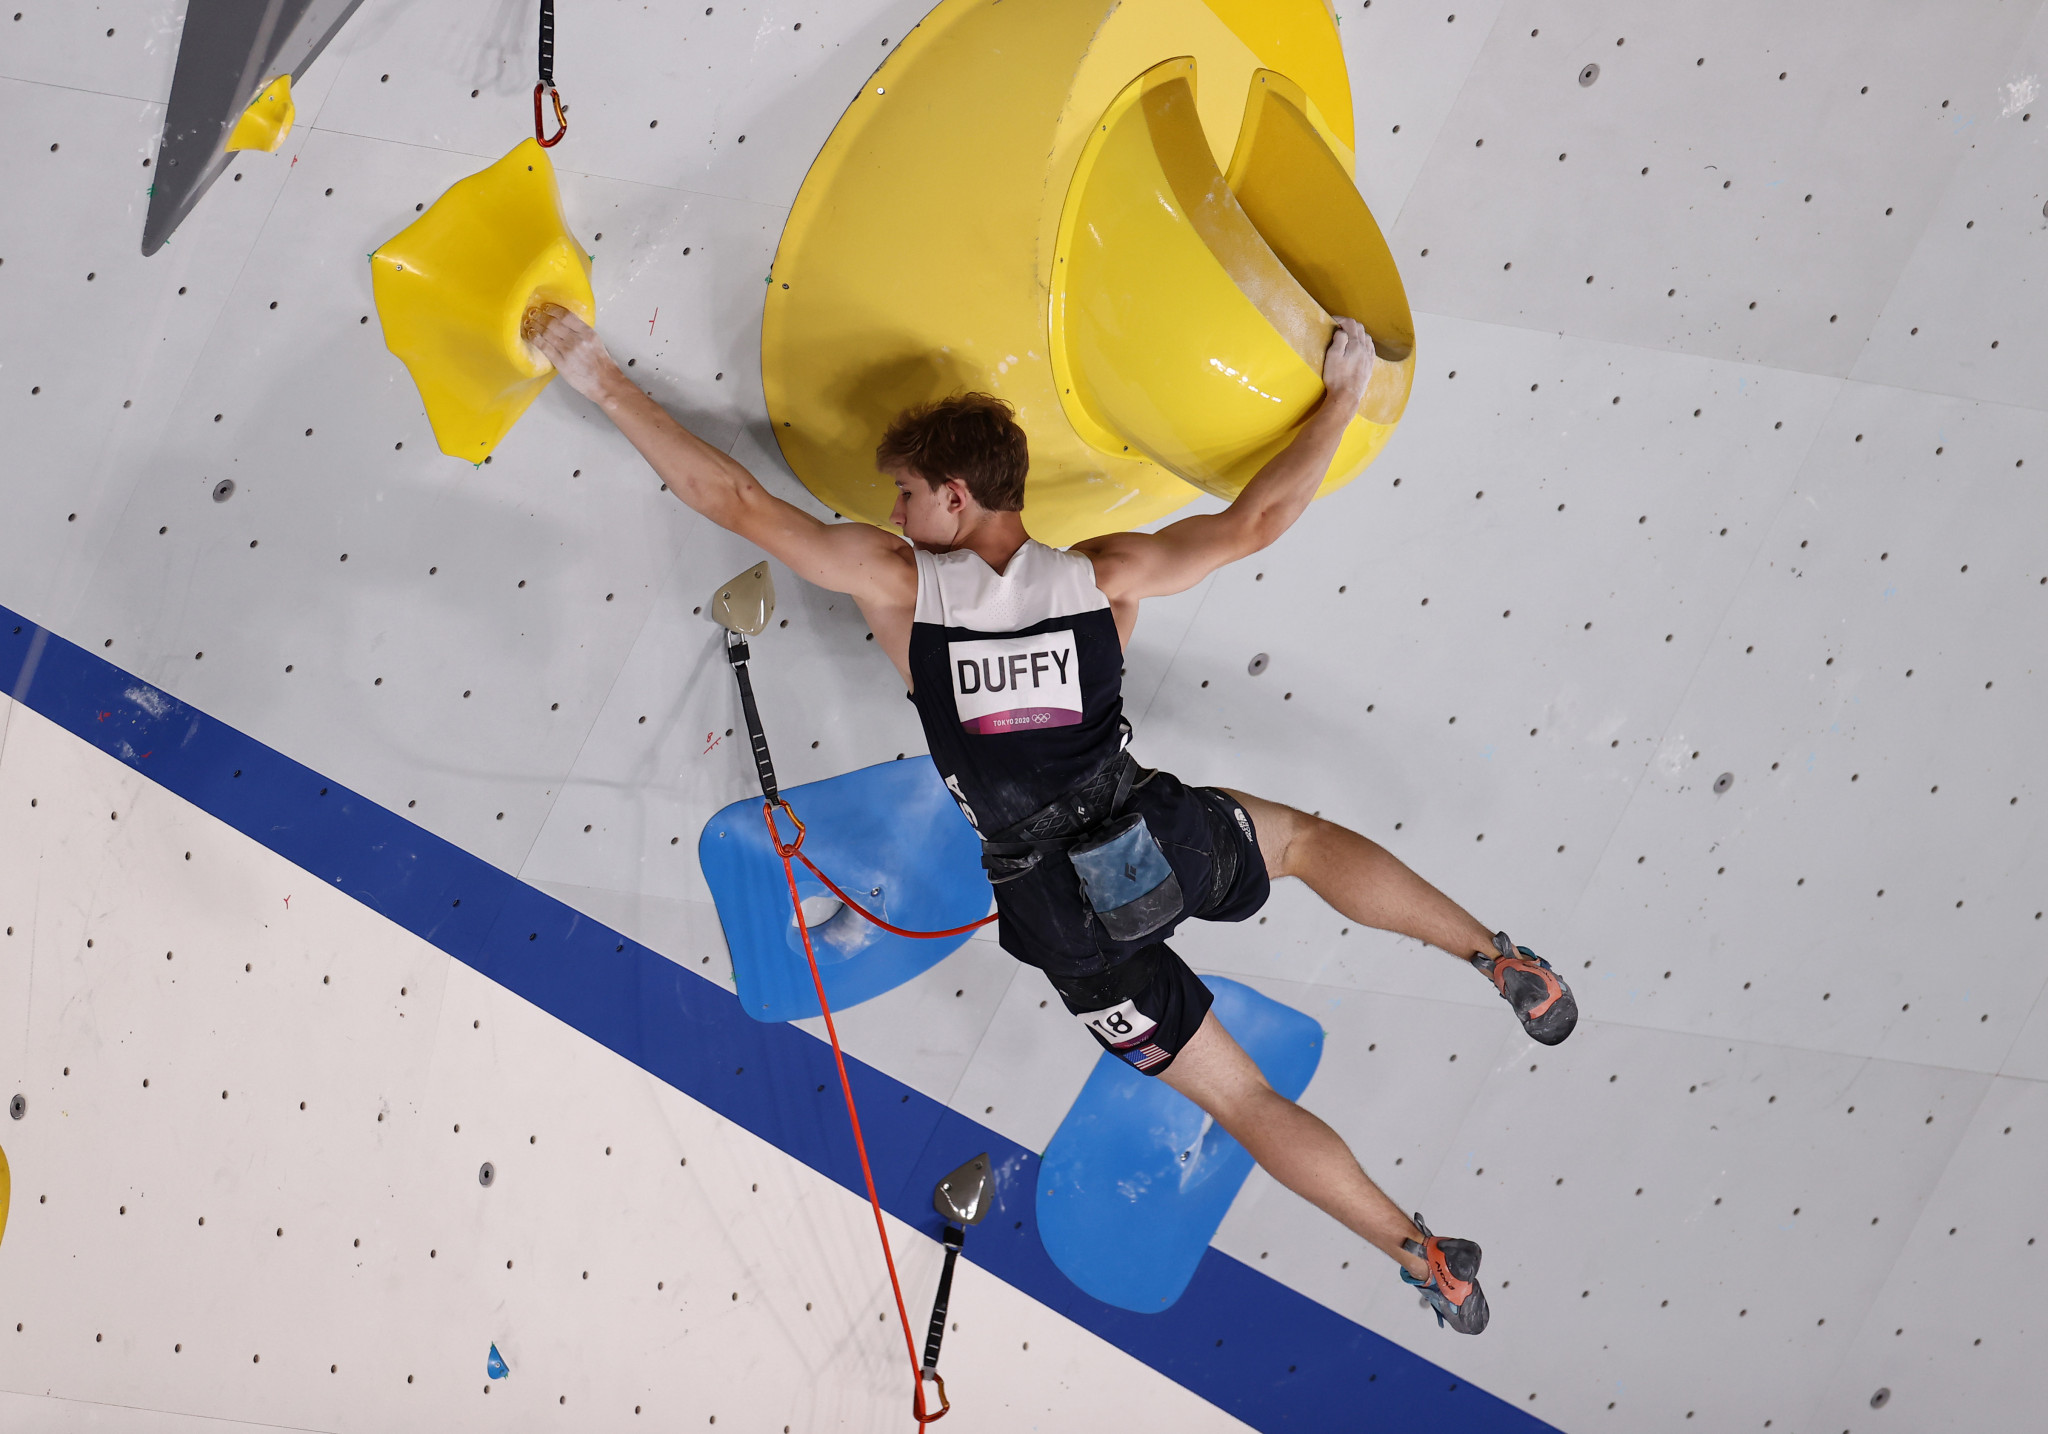 Duffy becomes first male climber to win golds in both boulder and lead at same Sport Climbing World Cup in Innsbruck